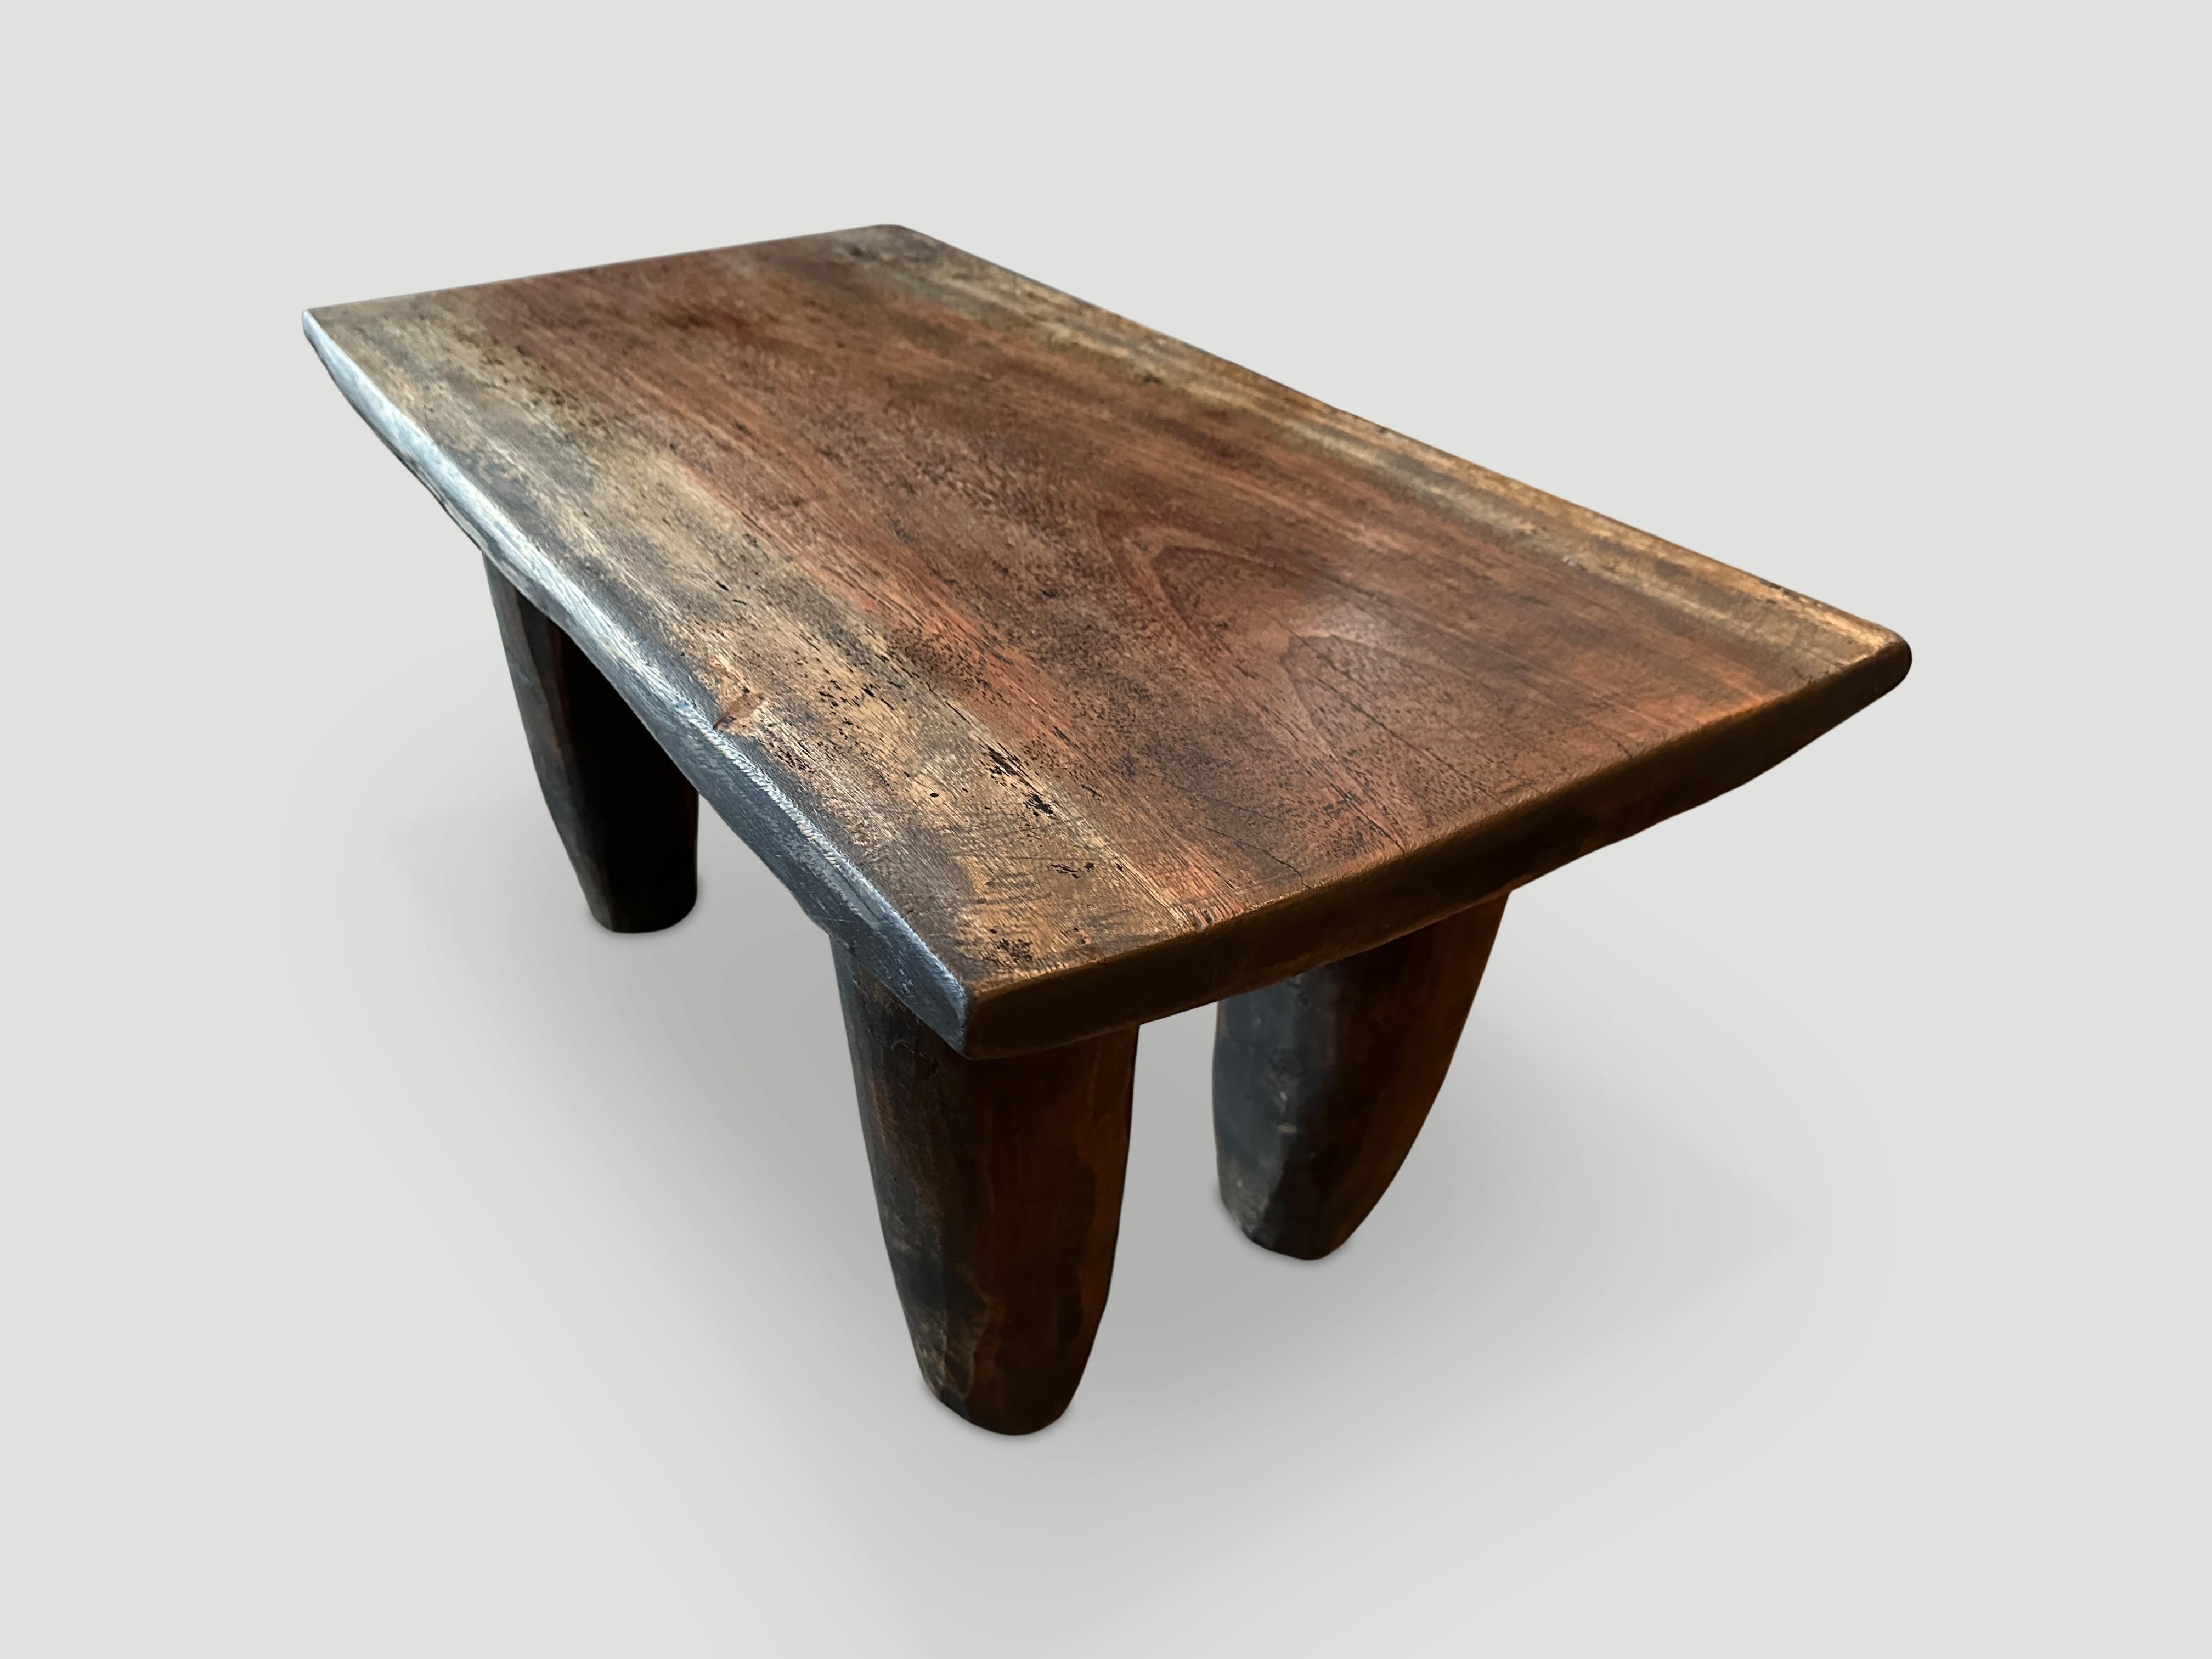 Antique coffee table or bench hand carved by the Senufo tribes from a single block of Iroko wood, native to the west coast of Africa. The wood is tough, dense and very durable. Shown with cone style legs. We only source the best. This one is